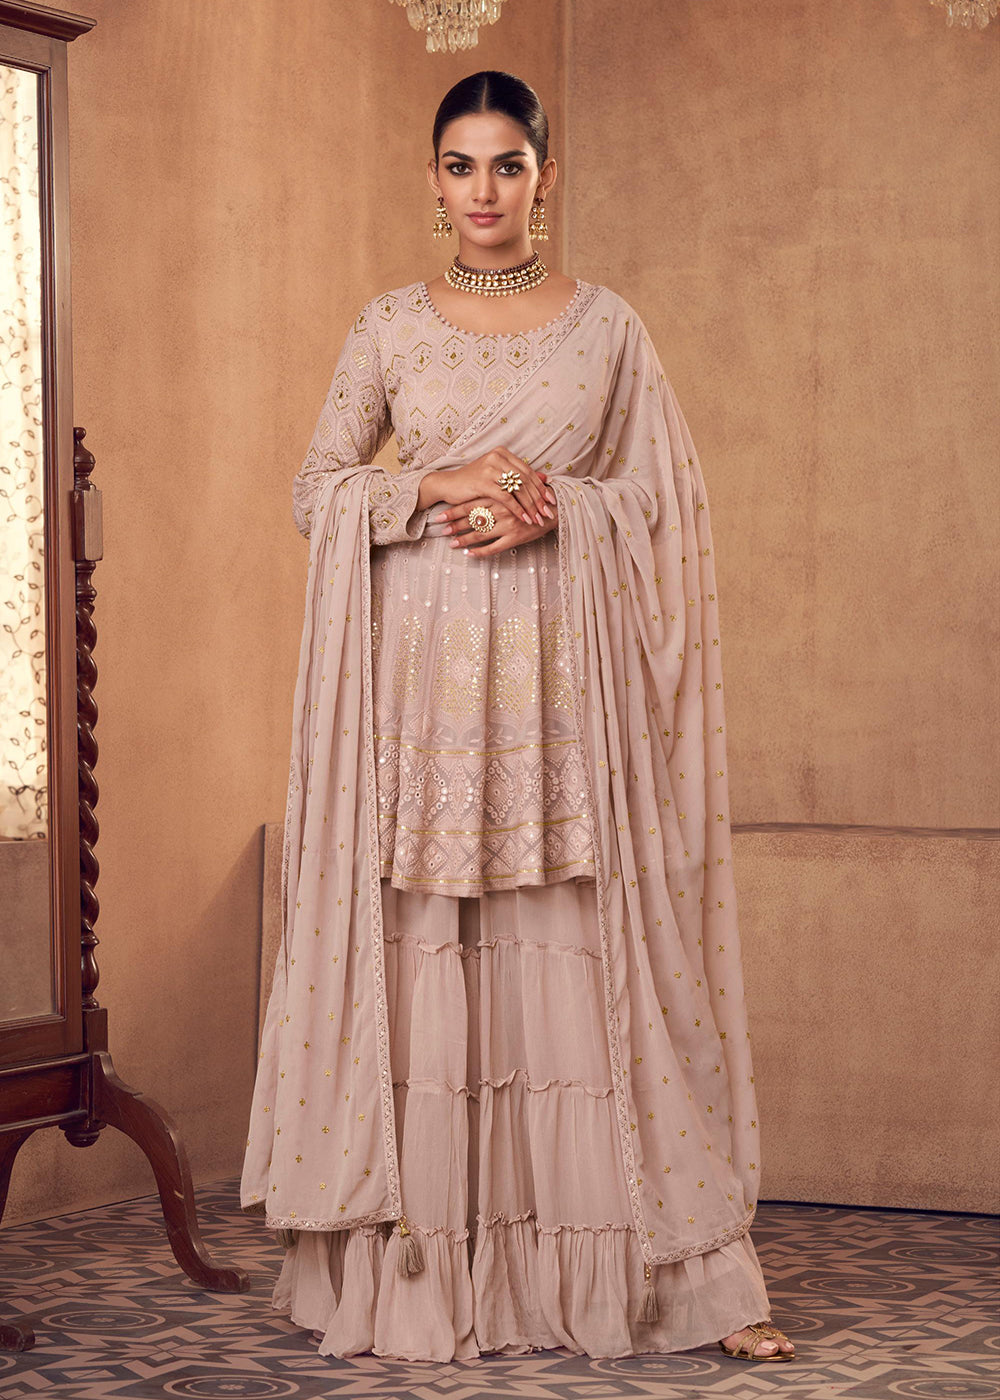 Buy Now Palazzo Style Light Mauve Georgette & Chinon Salwar Suit Online in USA, UK, Canada, Germany, Australia & Worldwide at Empress Clothing.